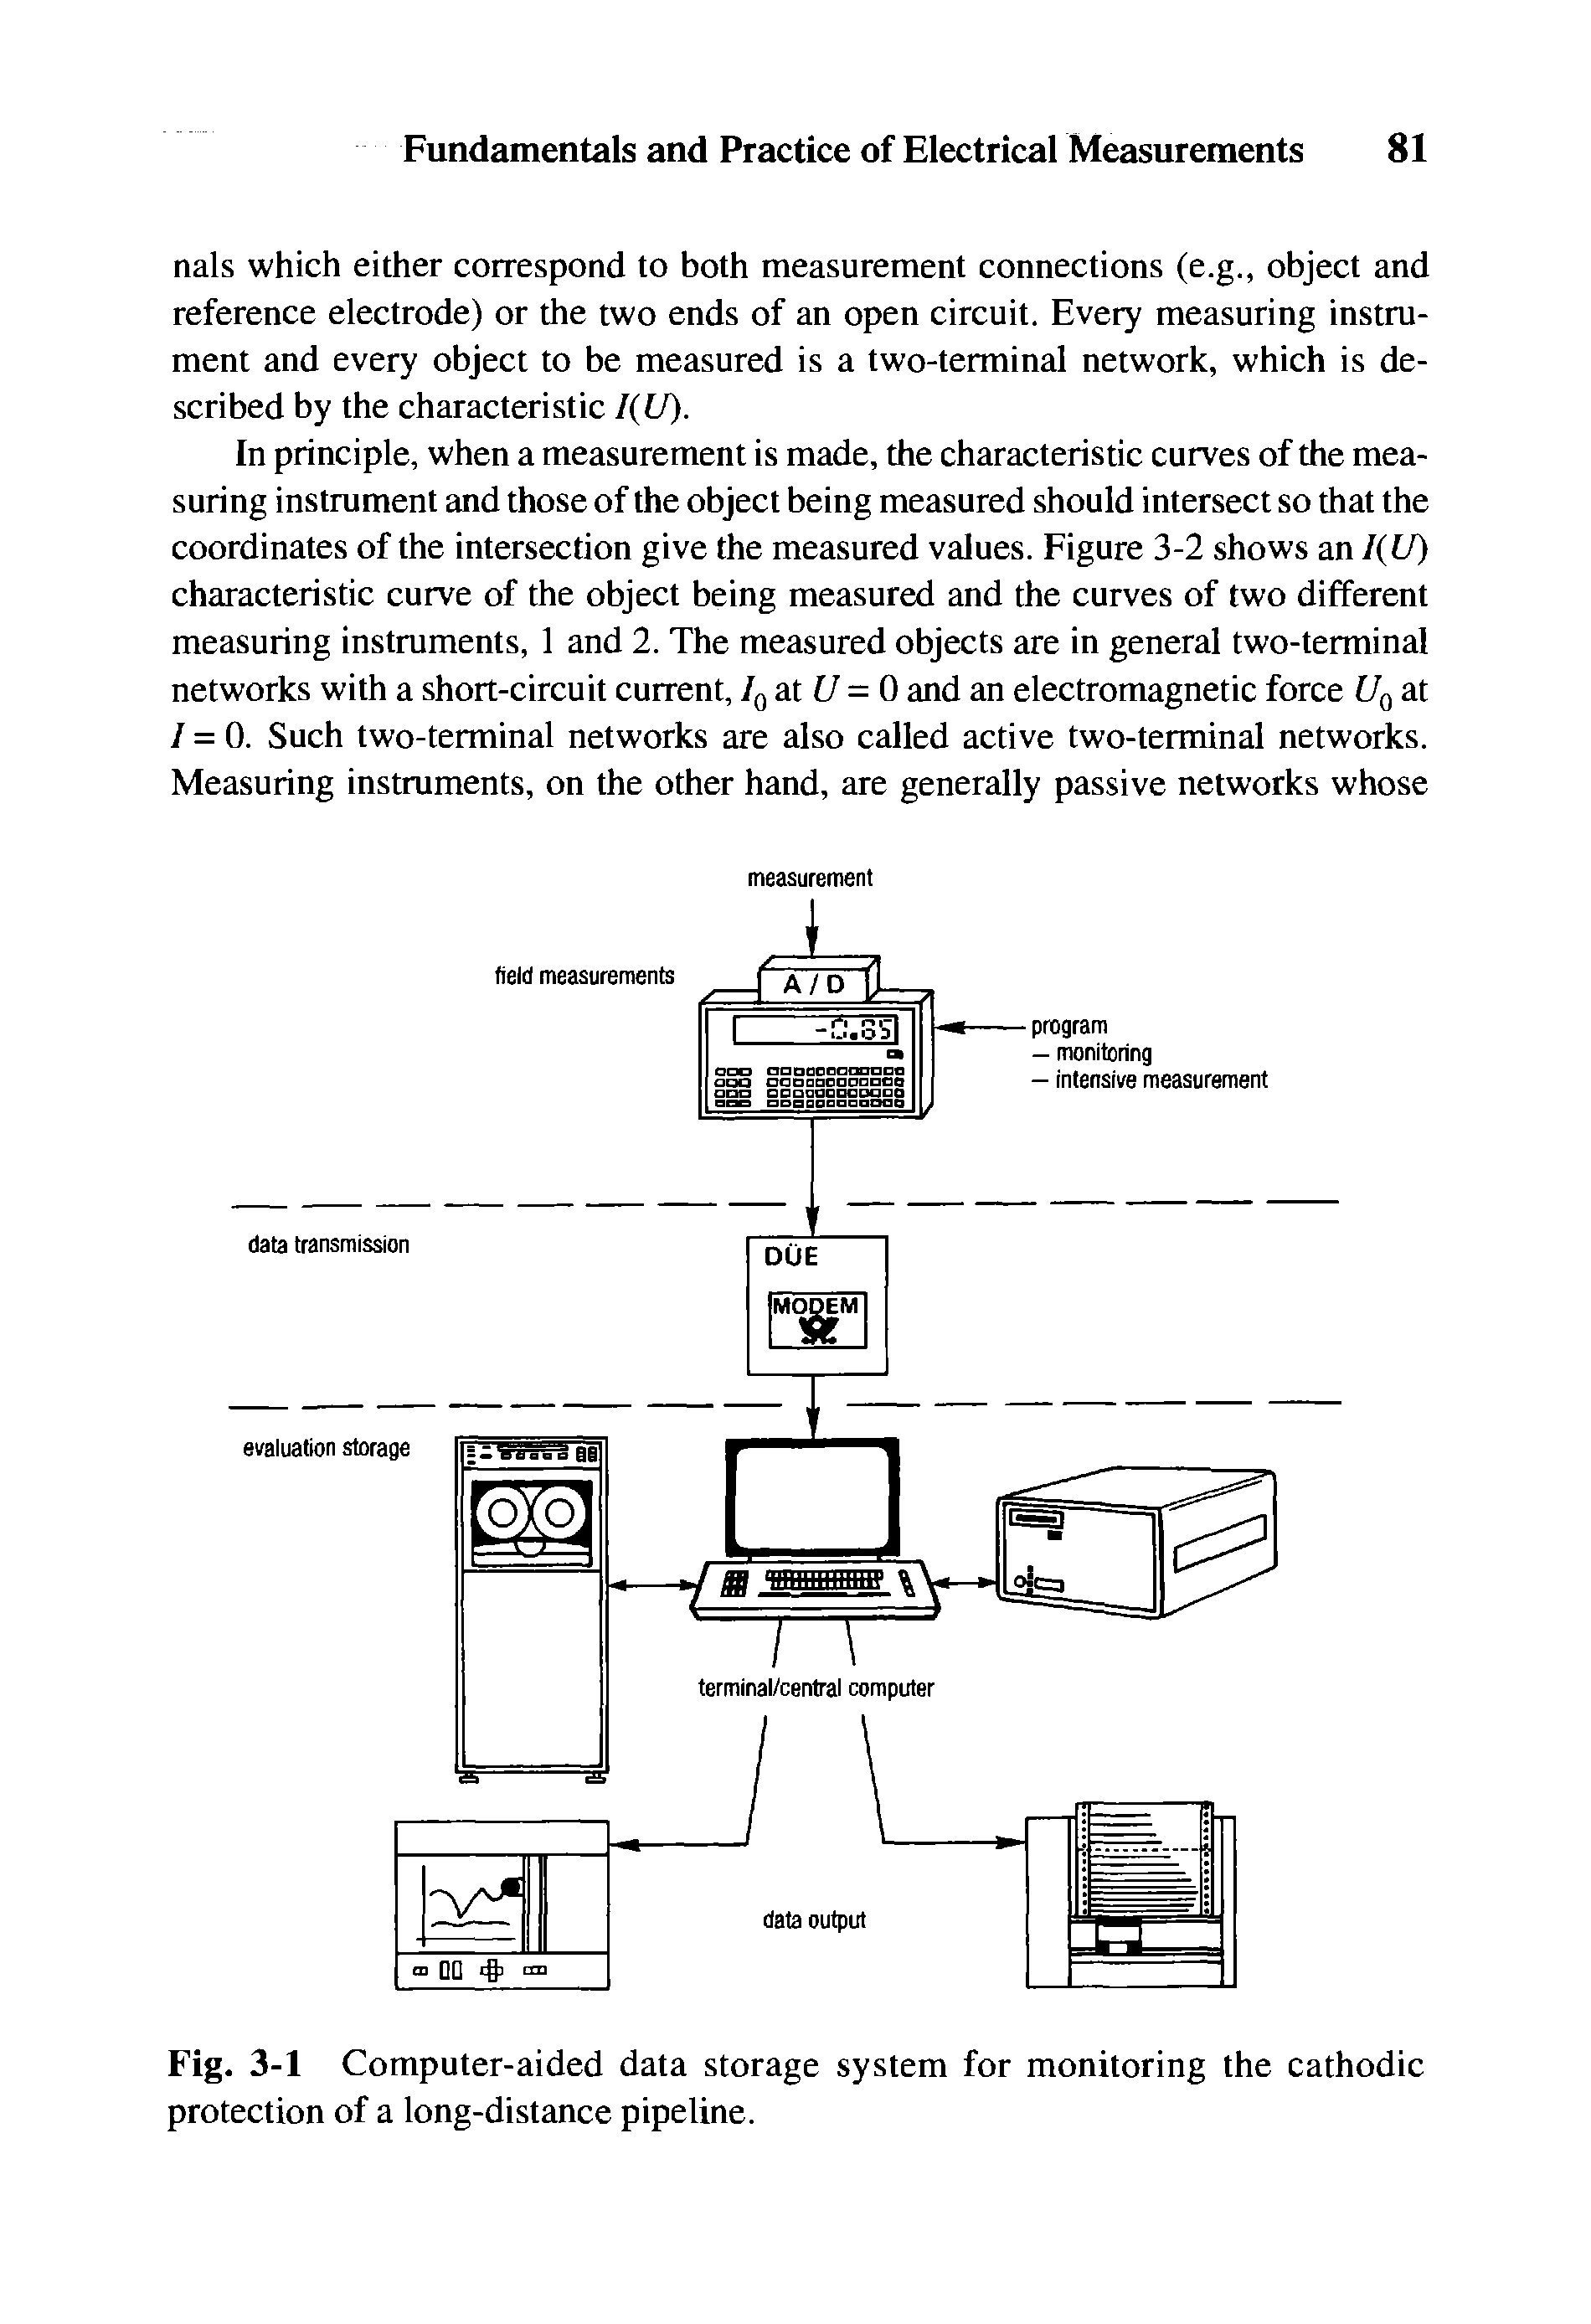 Fig. 3-1 Computer-aided data storage system for monitoring the cathodic protection of a long-distance pipeline.